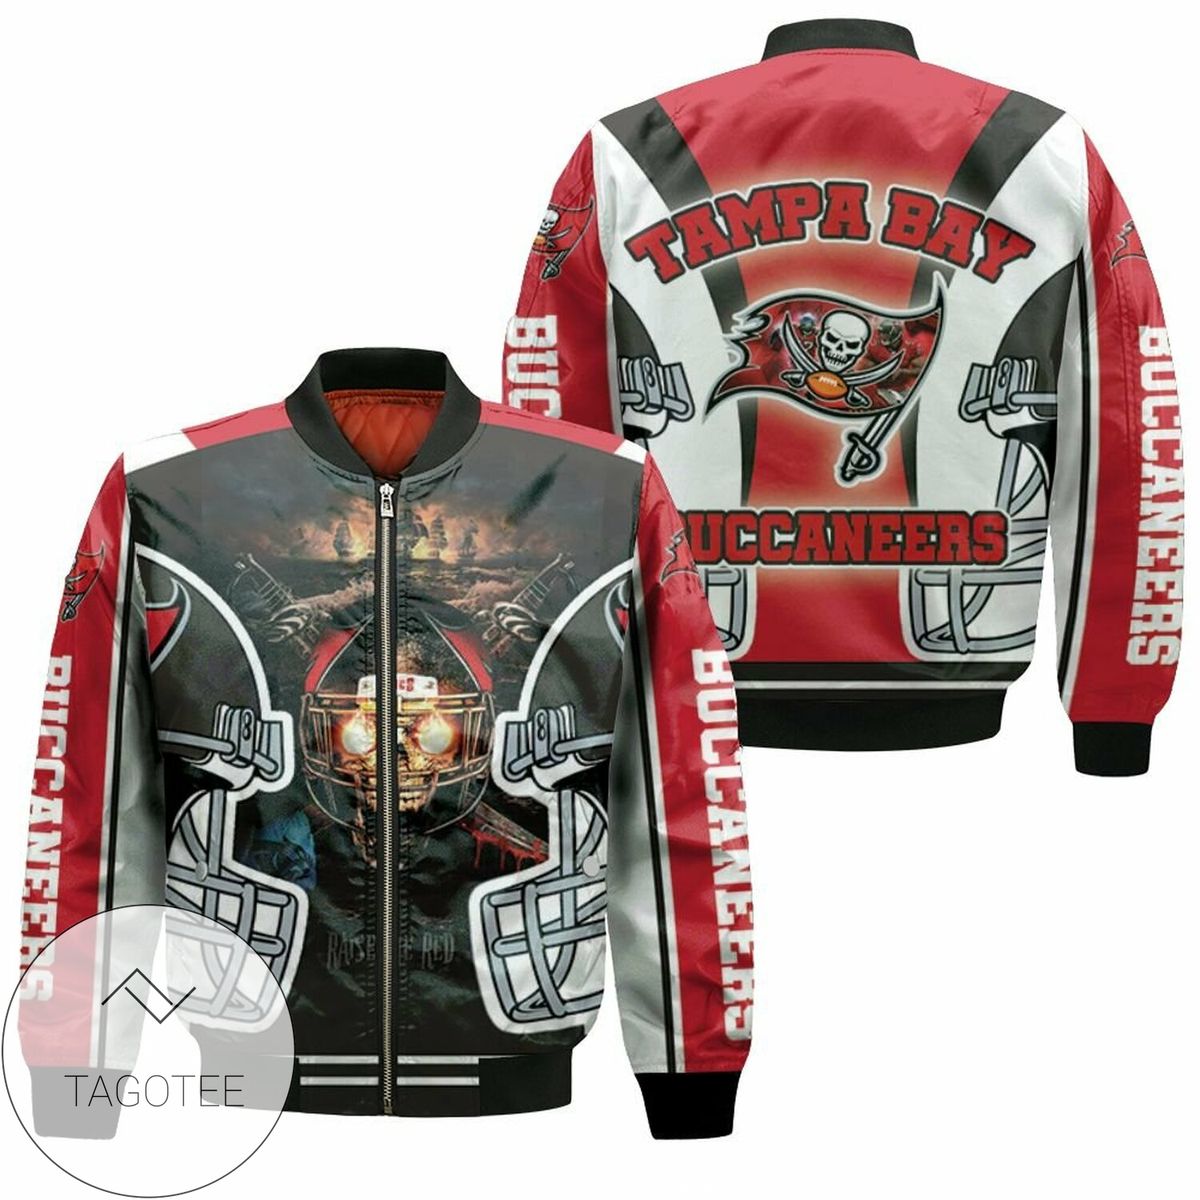 Tampa Bay Buccaneers Raised The Red Nfc South Division Champions Super Bowl 2021 Bomber Jacket